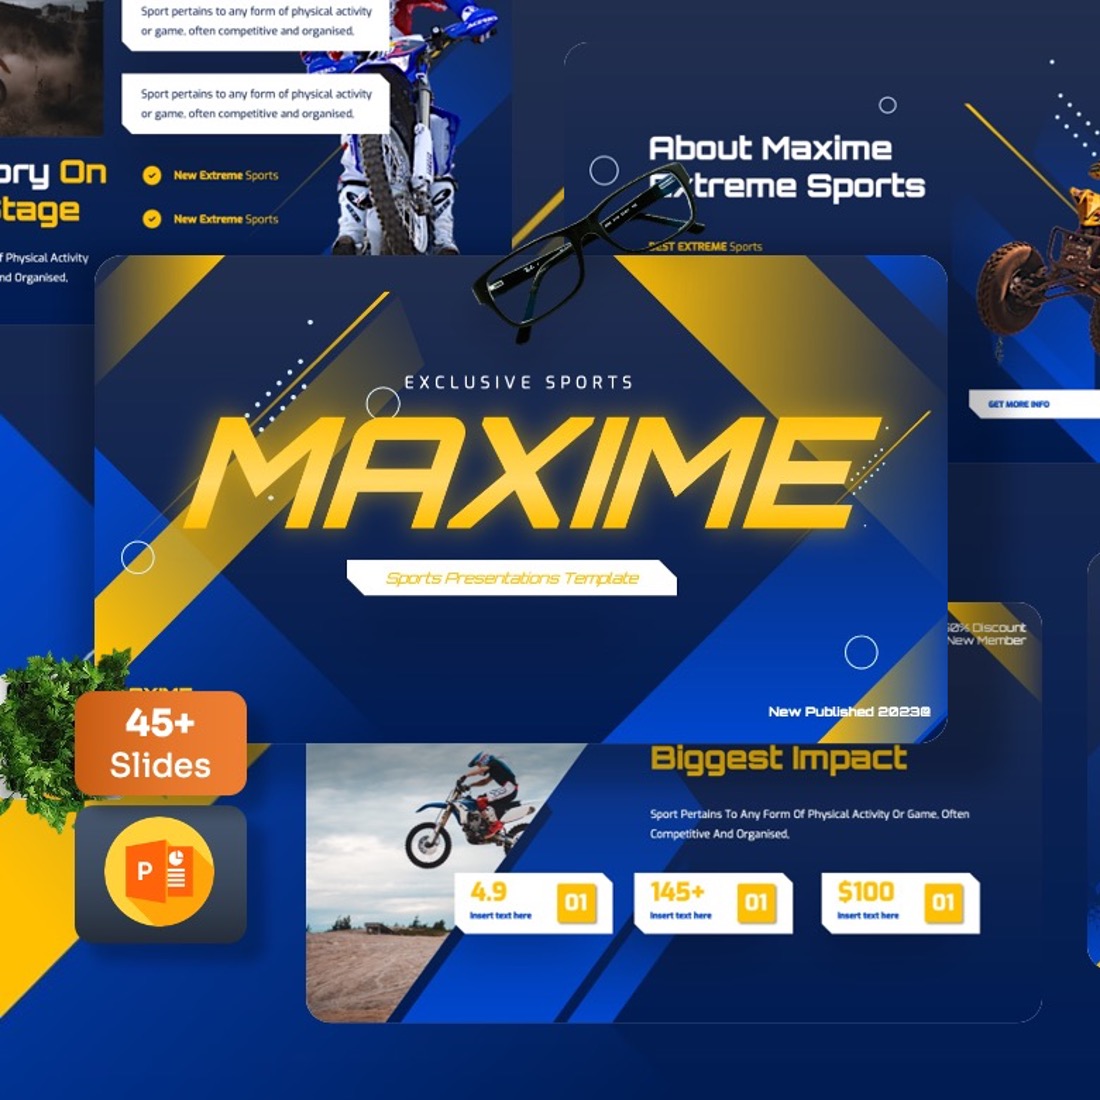 Maxime - Sports Powerpoint Templates cover image.